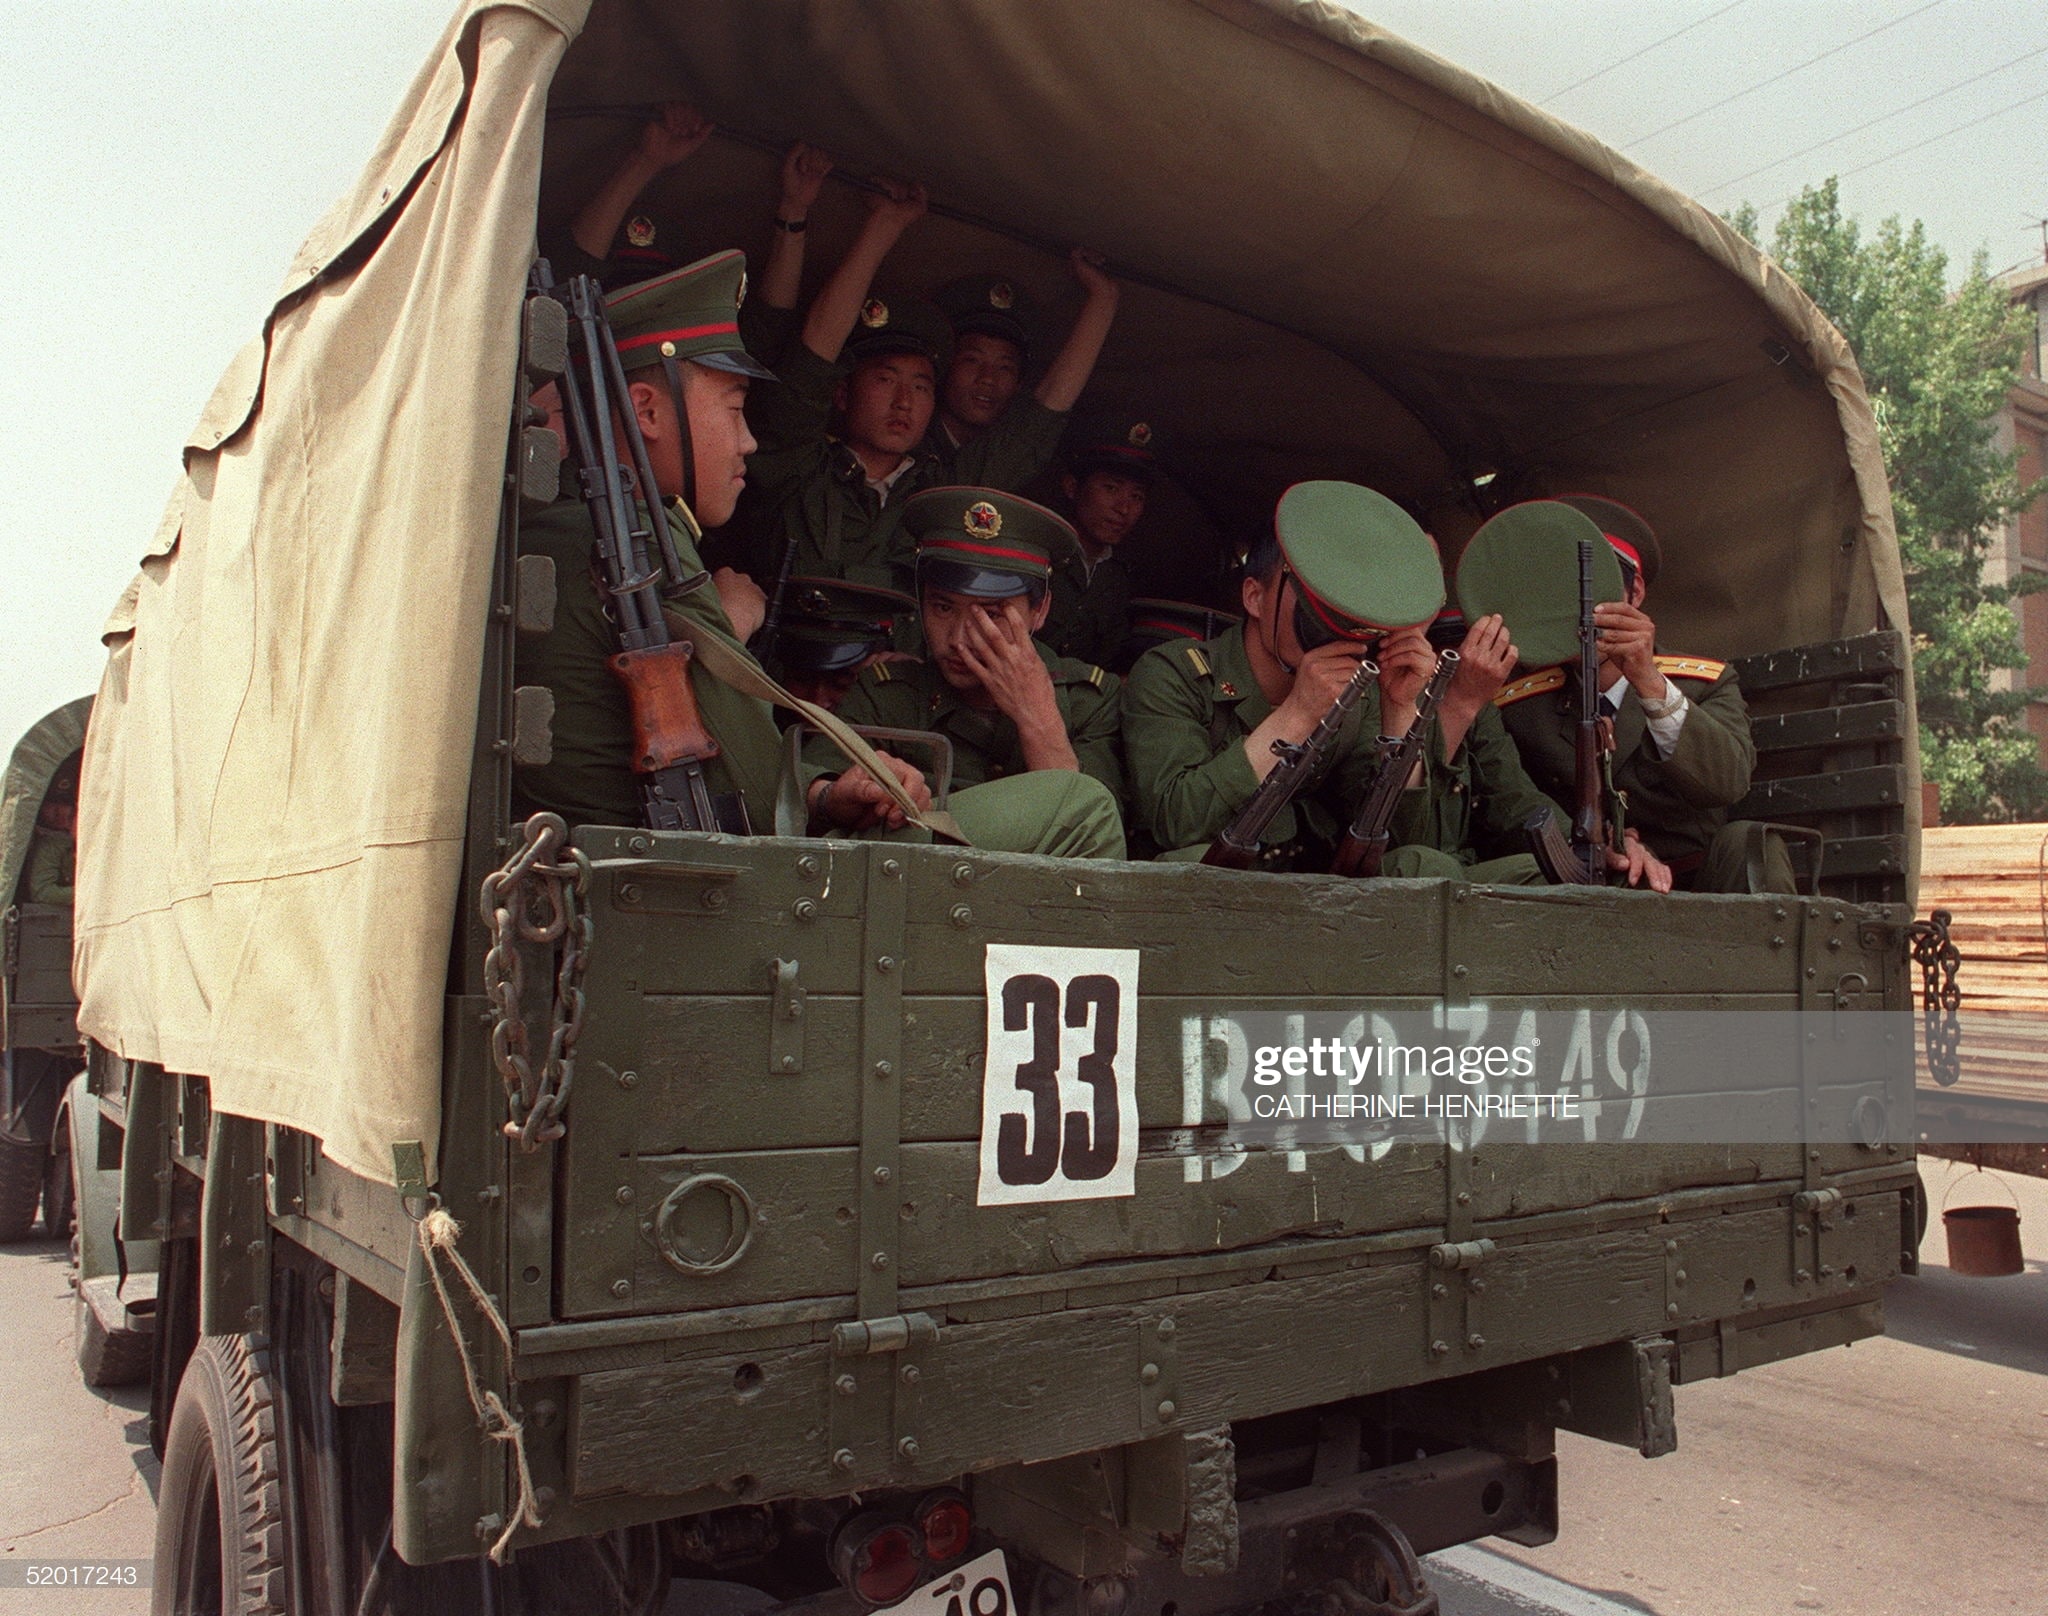 BEIJING CHINA - MAY 20 Armed soldiers of Peoples Liberation Army PLO hide their faces when they are photographed 20 May 1989 in Beijing on their way to Tiananmen Square 20 May 1989 after the Martial Law was proclaimed in Beijing 20 May In a show of force 04 June China leaders vented their fury and frustration n student dissidents and their pro-democracy supporters Several hundred people have been killed and thousands wounded when soldiers moved on Tiananmen Square during a violent military crackdown ending six weeks of student demonstrations Photo credit should read CATHERINE HENRIETTEAFPGetty Images